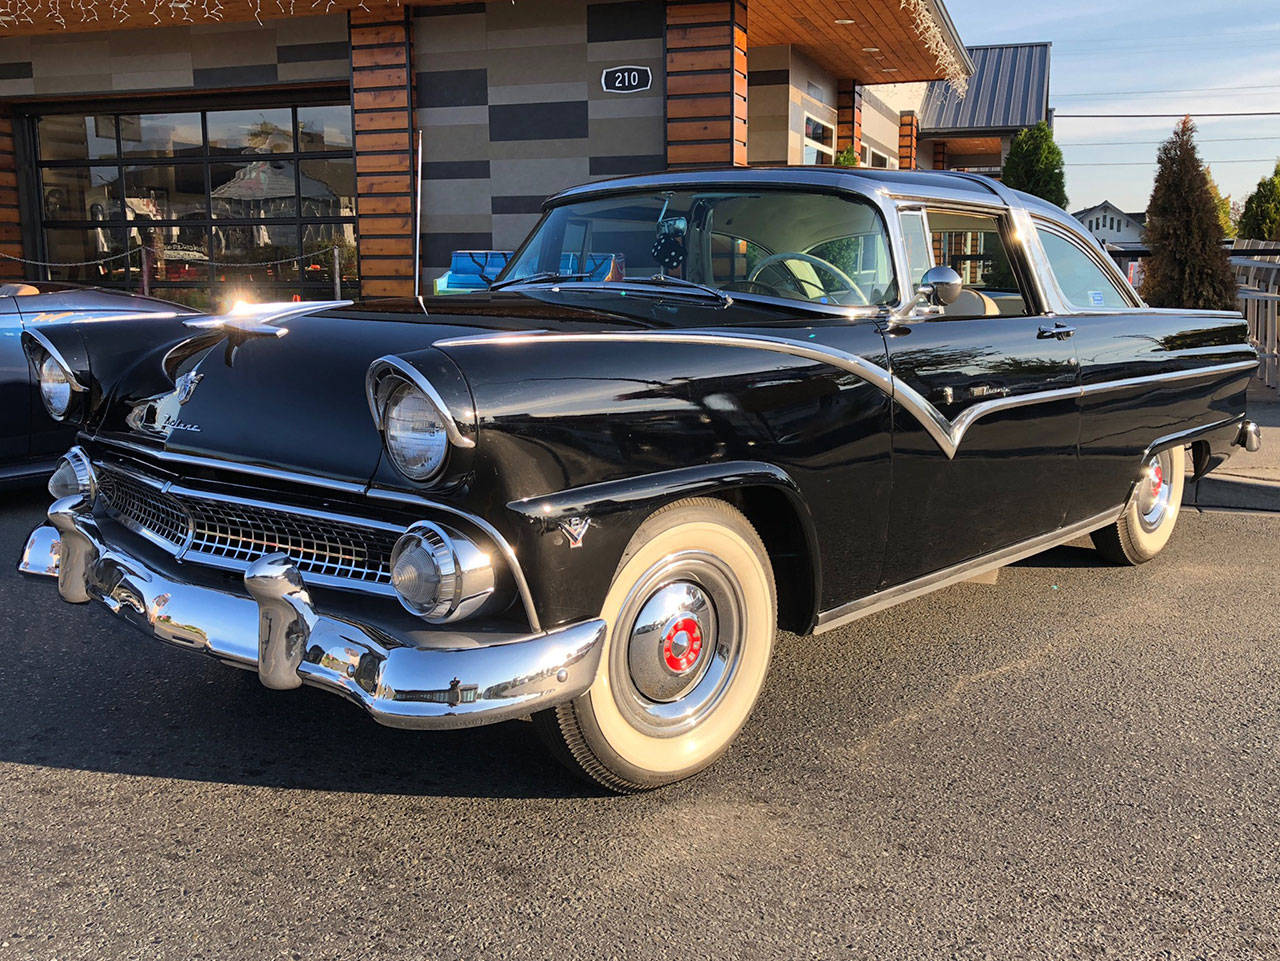 Sequim Museum & Arts’ Sequim August Days Car Show opens to cars, trucks, and motorcycles from any era on Saturday, Aug. 17, at the Sequim High School Athletic Field on the corner of Sequim Avenue and Hendrickson Road. Photo courtesy of Sequim Museum & Arts